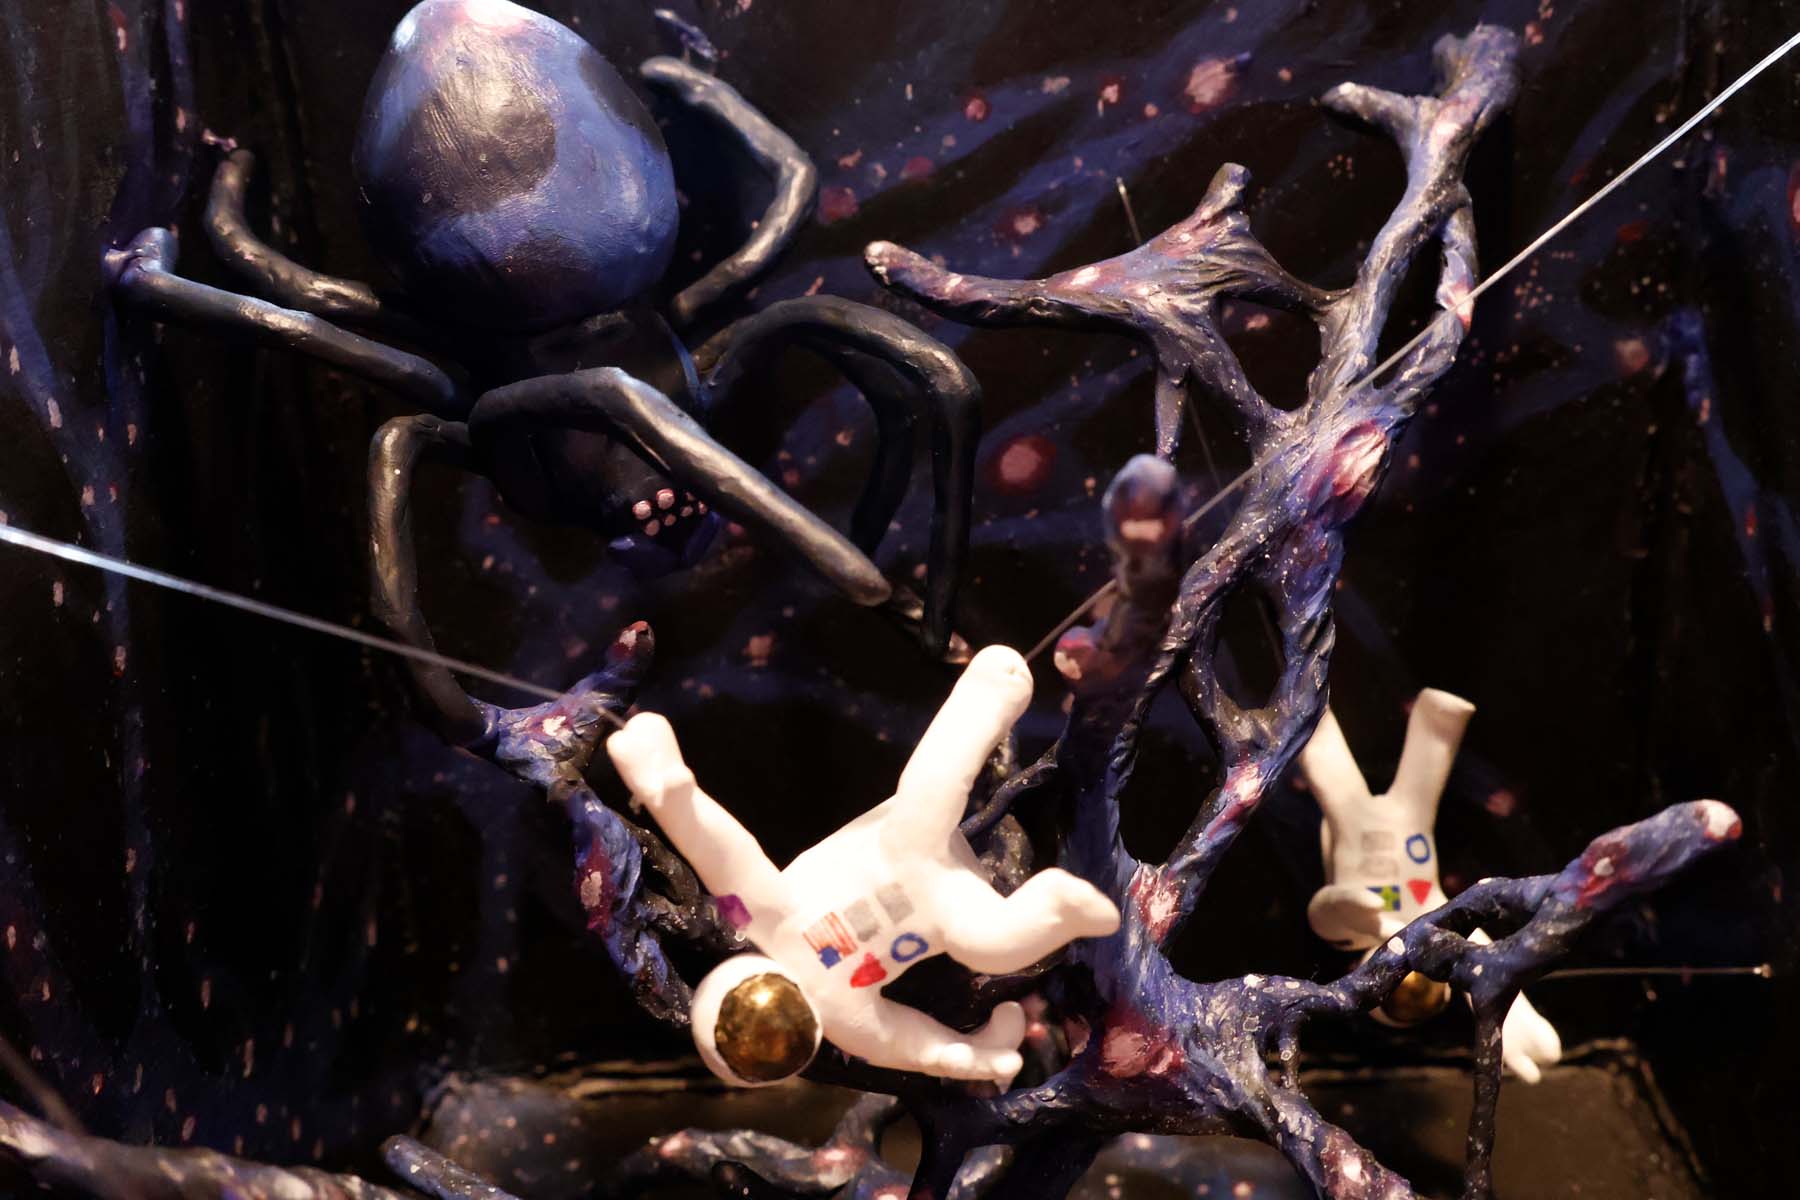 A closeup of the astronaut in the top left, who appears to be drifting dangerously close to the cosmic spider.